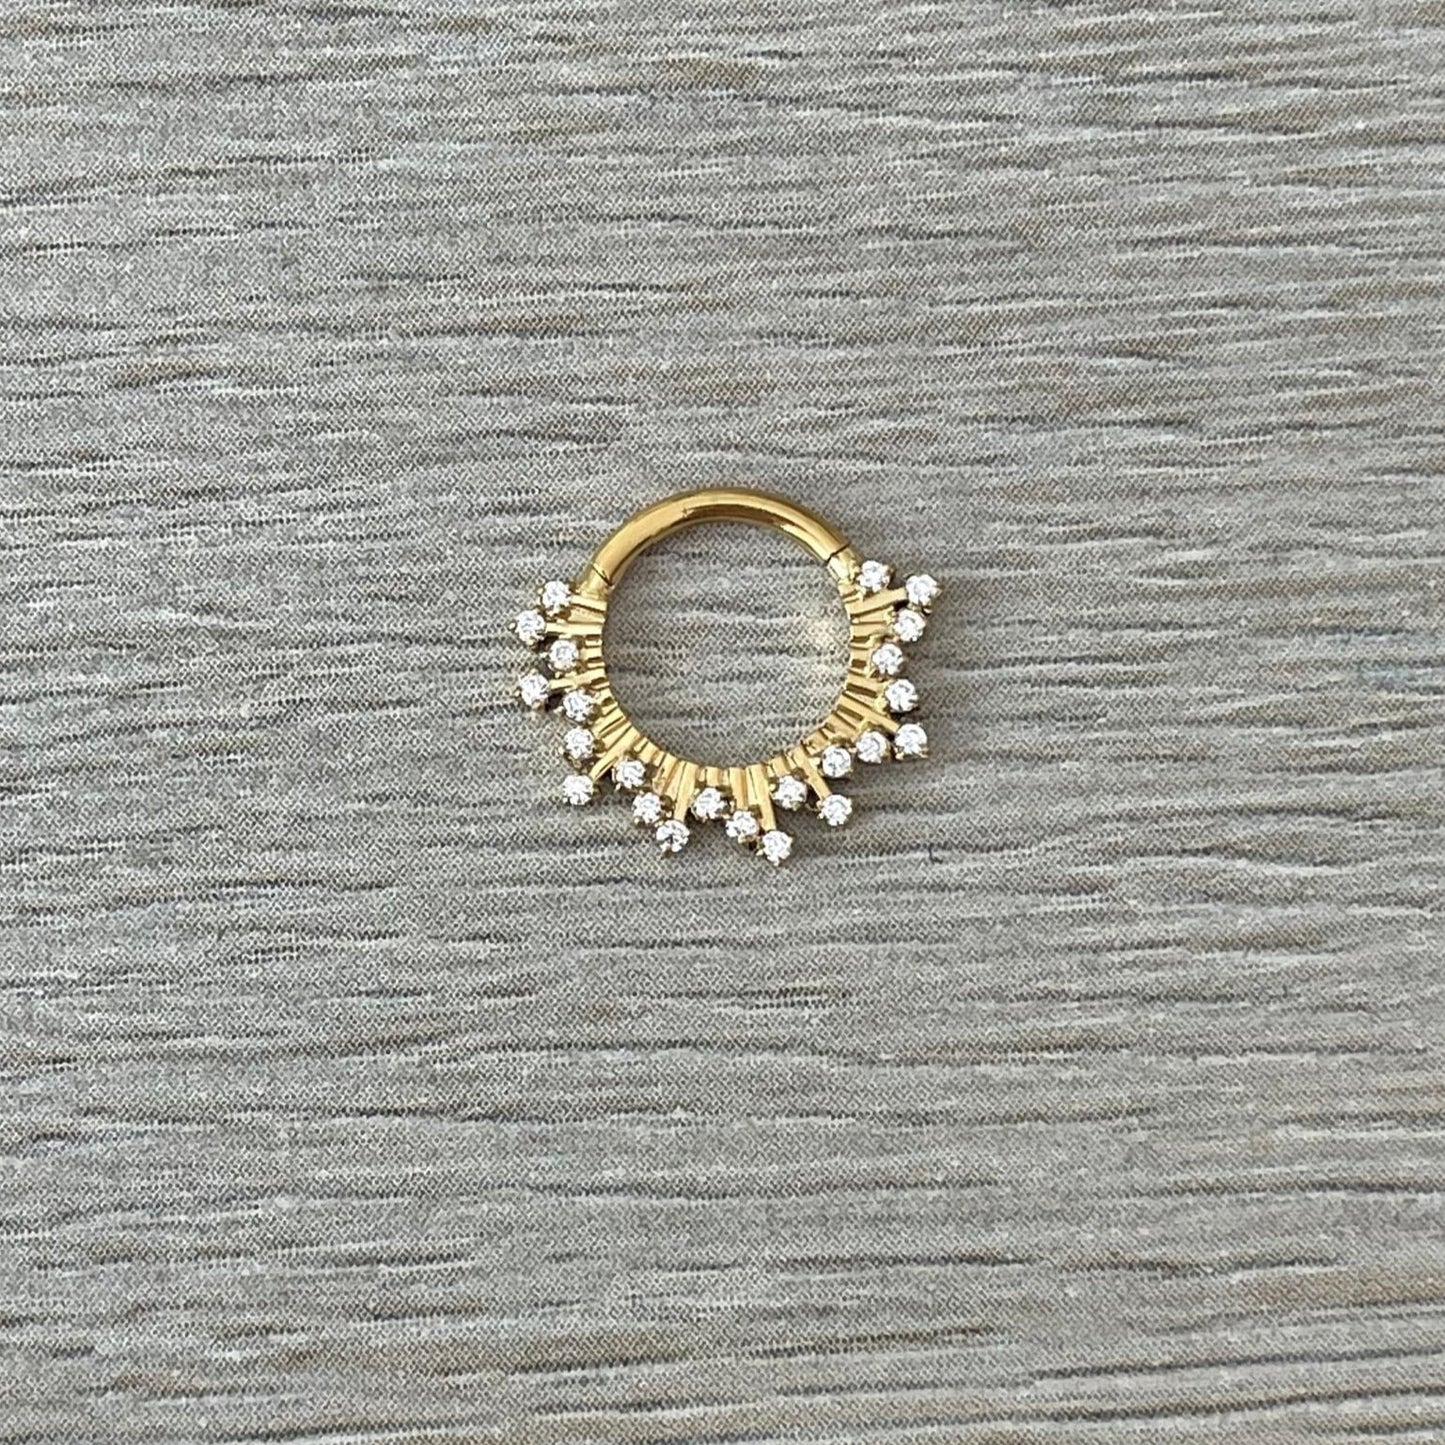 Gold Sunburst Daith Earring (16G | 8mm or 10mm | Surgical Steel | Gold or Silver)